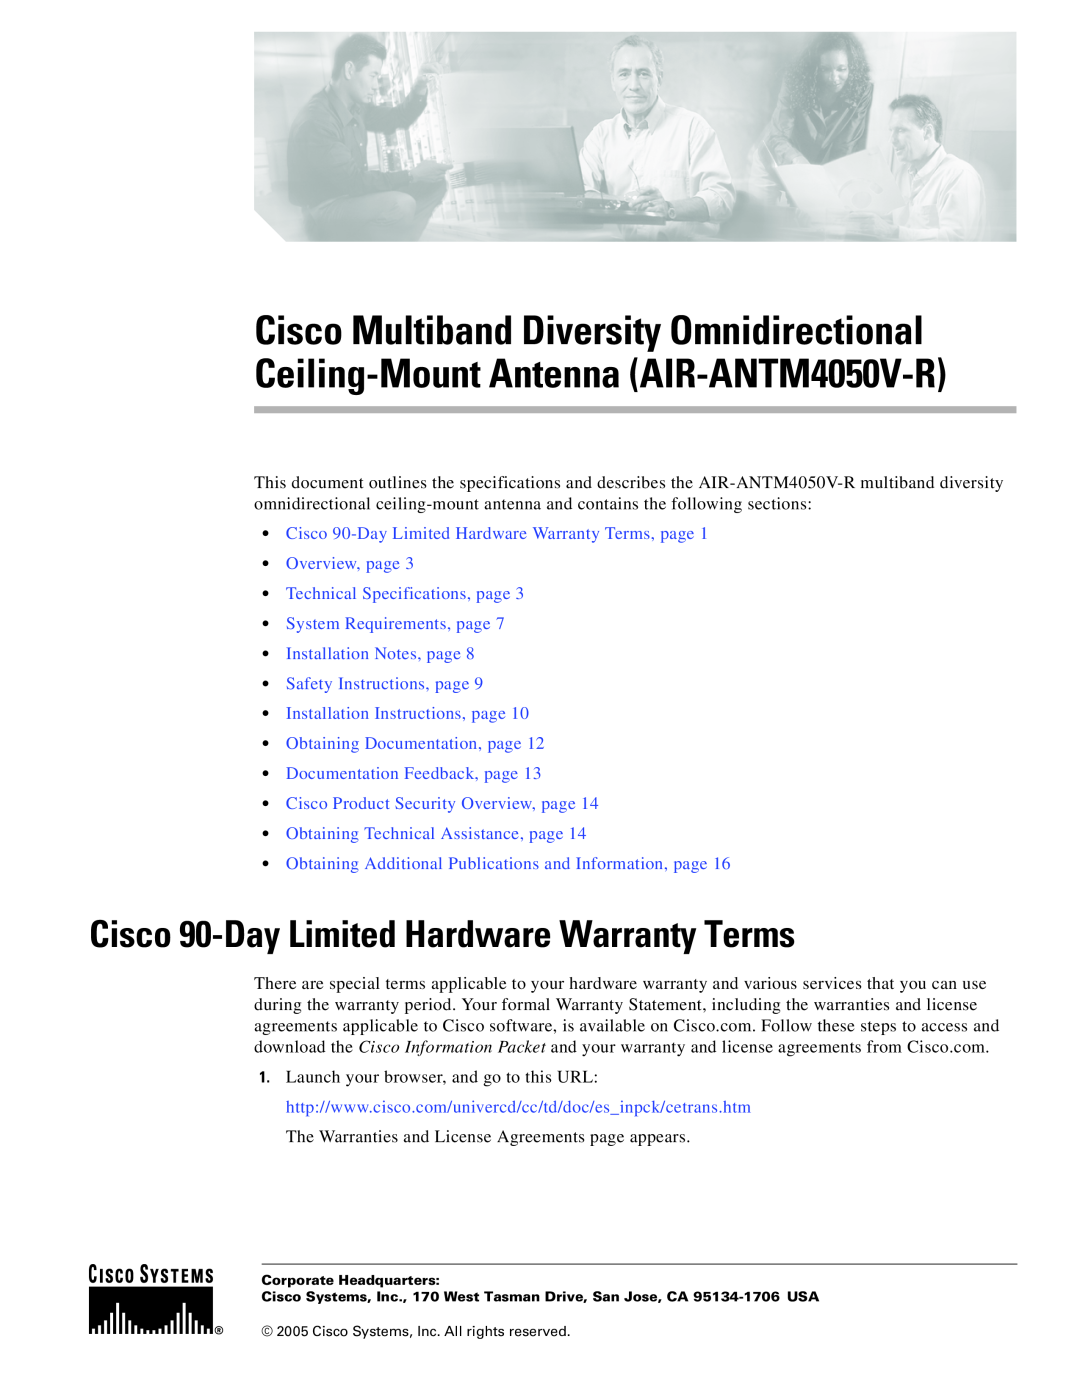 Cisco Systems AIR-ANTM4050V-R warranty Cisco 90-Day Limited Hardware Warranty Terms 